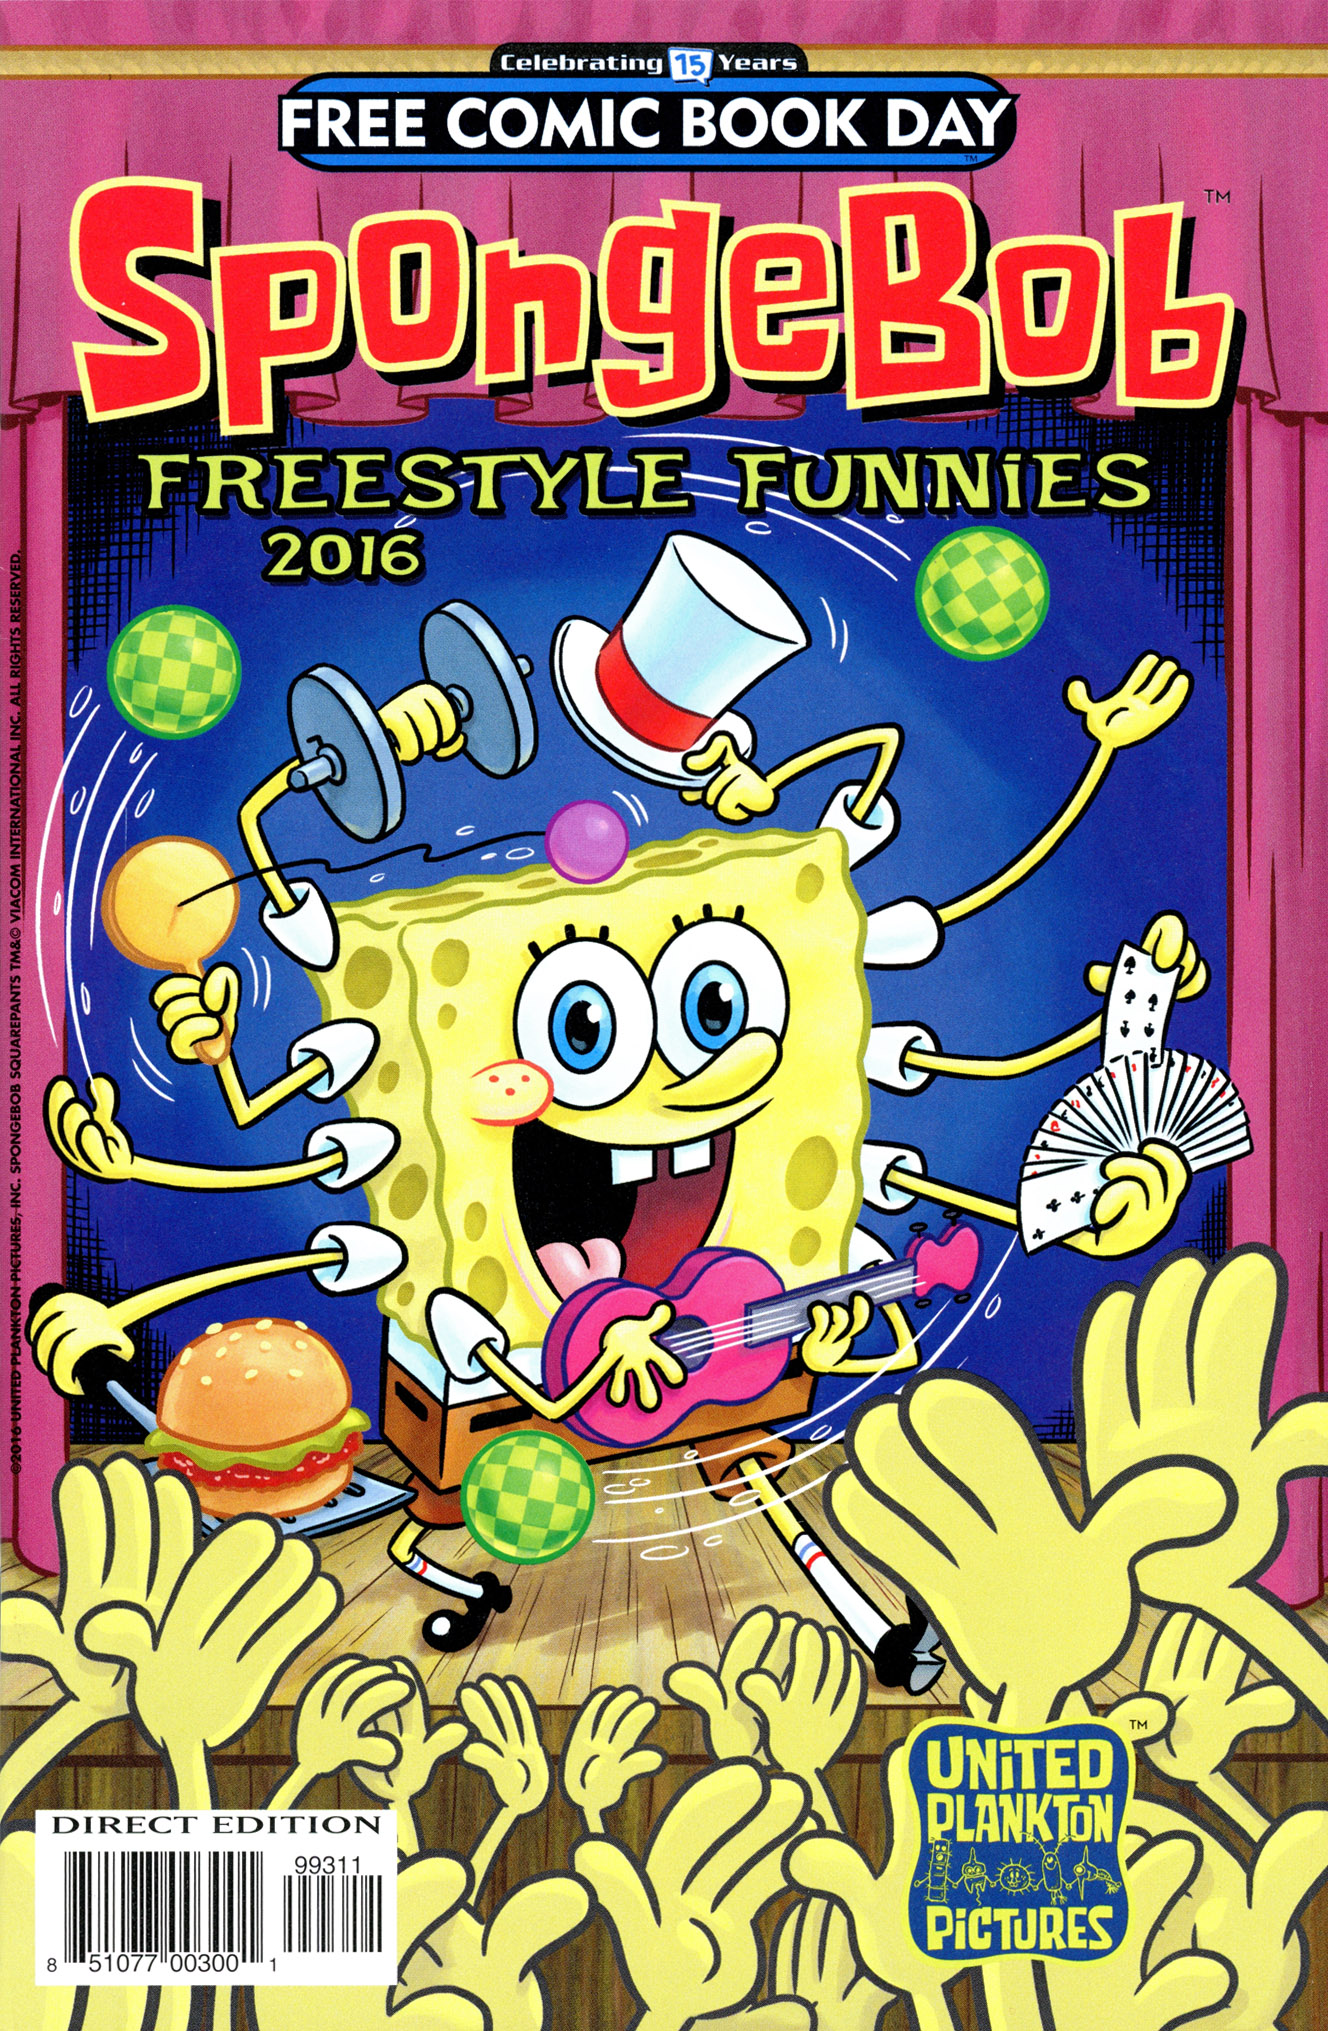 Read online Free Comic Book Day 2016 comic -  Issue # Spongebob Freestyle Funnies - 1